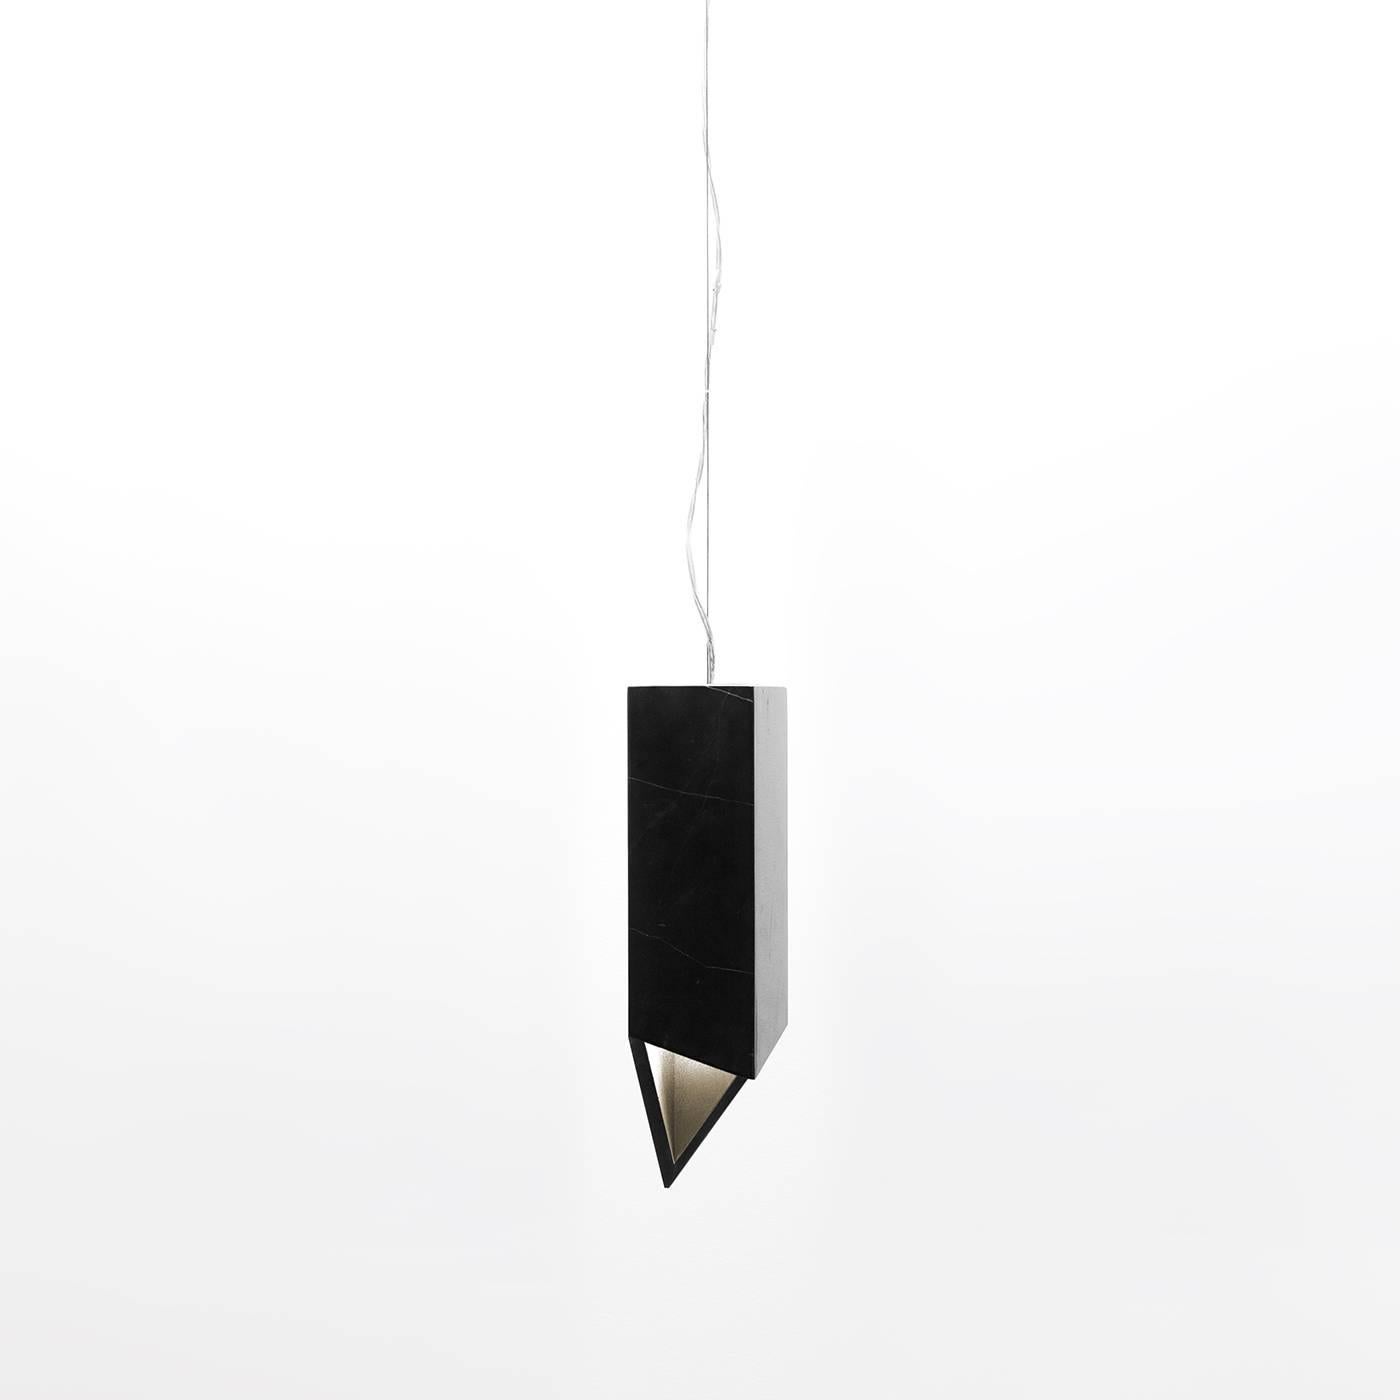 This Minimalist lamp, part of the Donatello collection and designed by Joe Gentile and Fabio Crippa of Studio ADL, is a timeless addition to an entryway, a dining room, or a living room and can be combined with the others in the same series for a